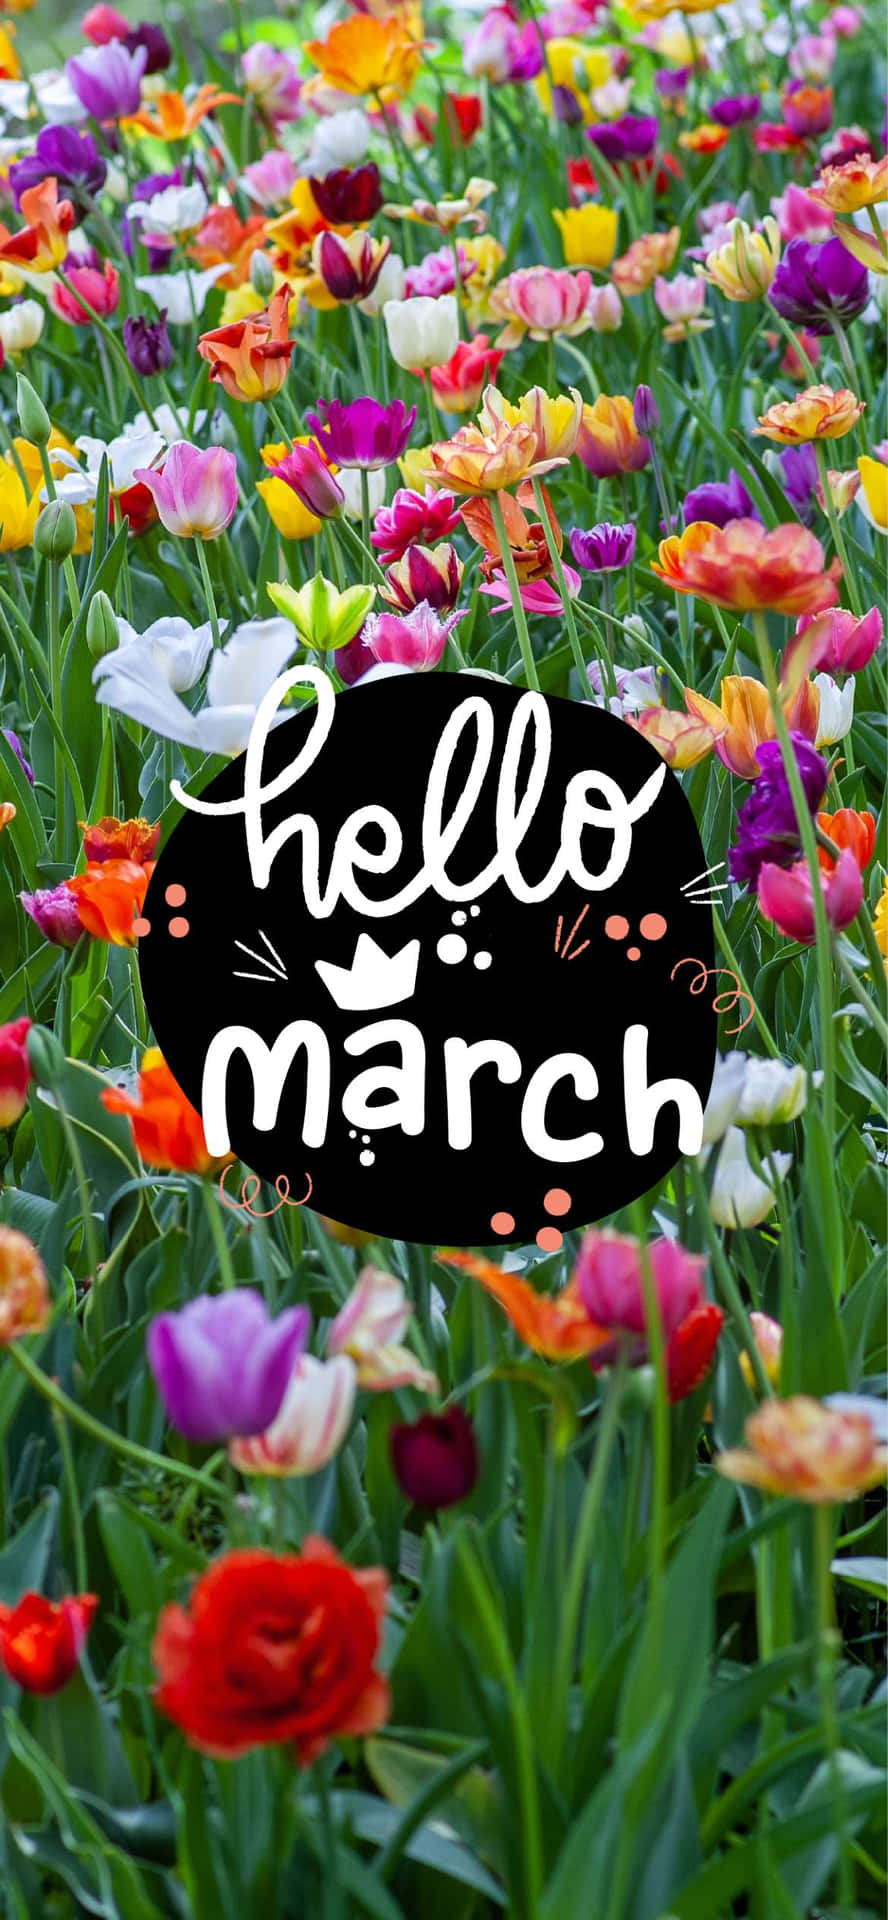 Image  “Welcome to March!” Wallpaper